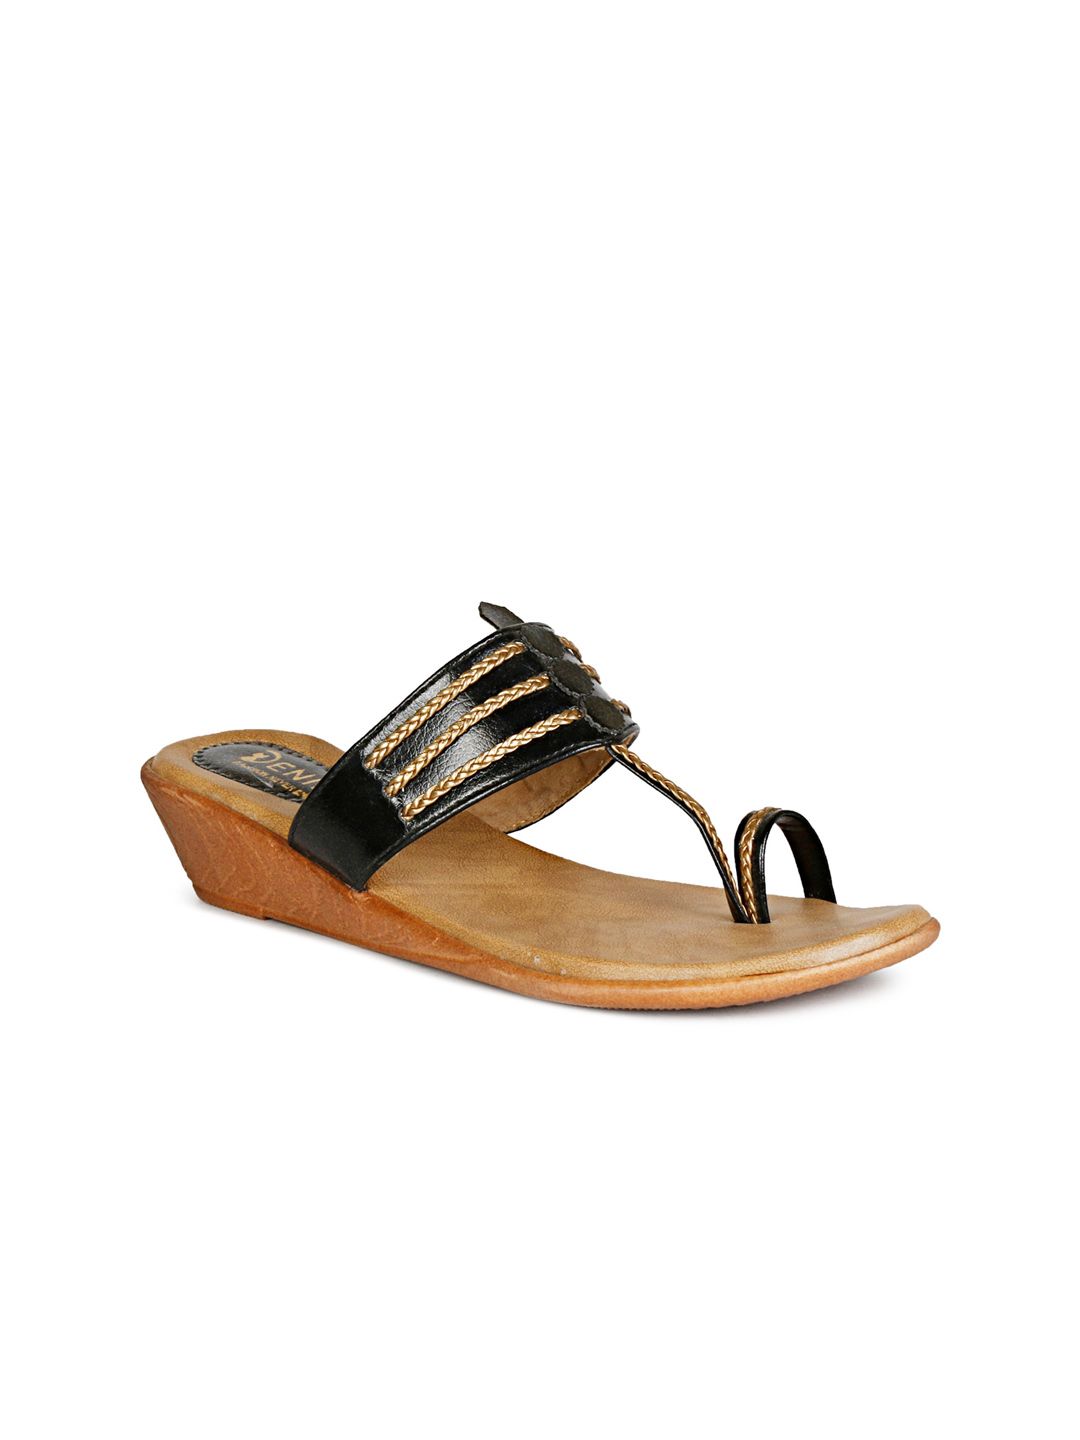 Denill Black & Tan Brown Embellished Ethnic Wedge Sandals Price in India